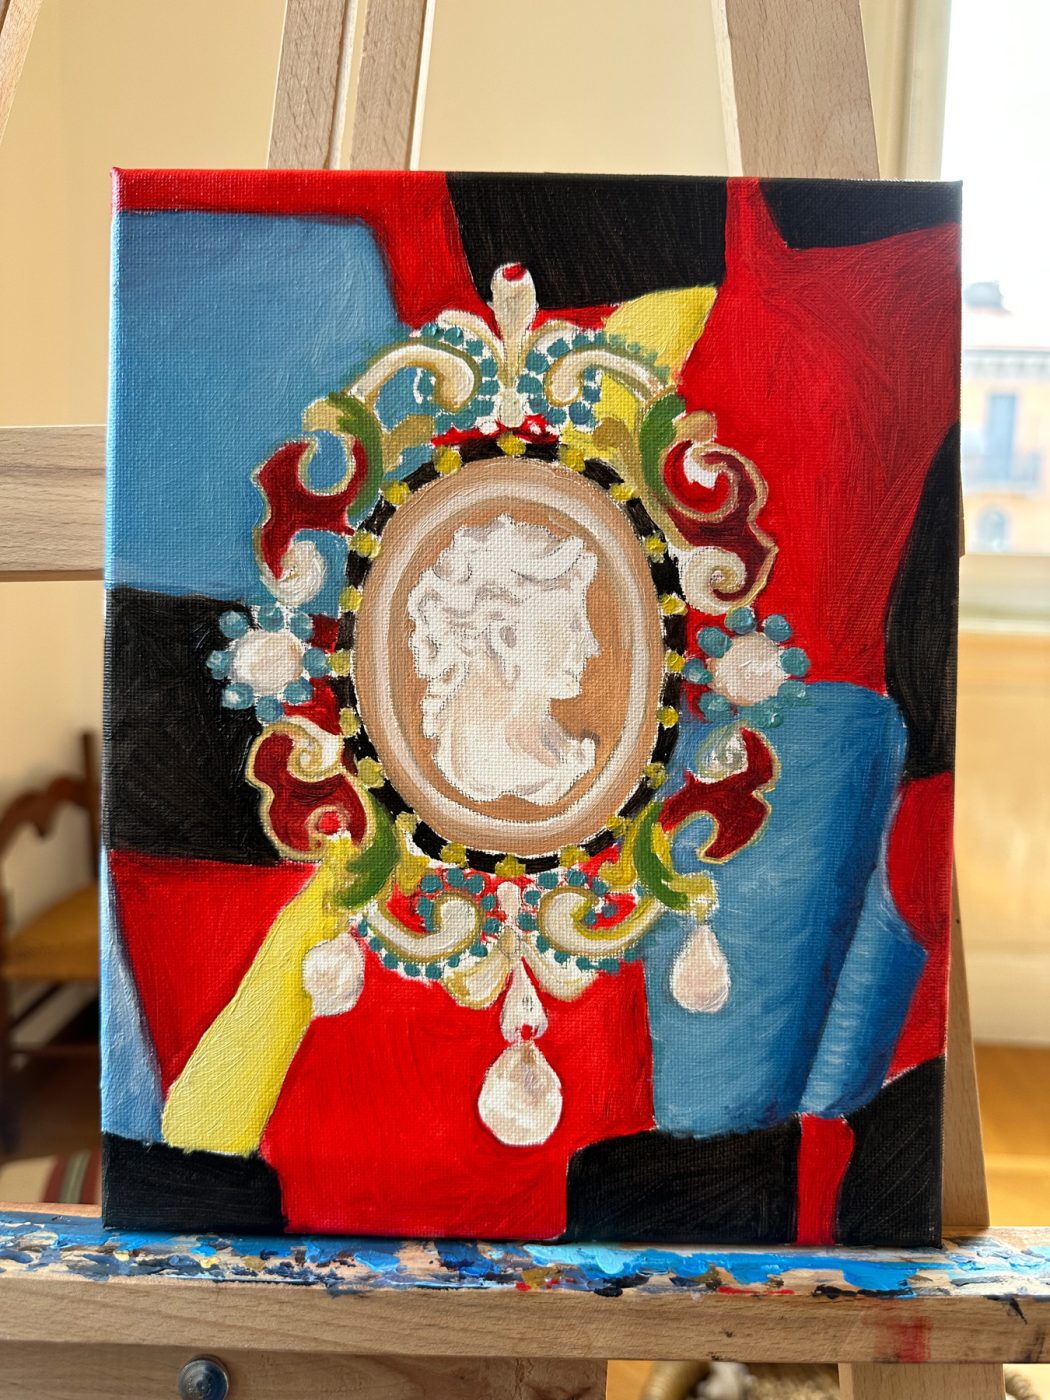 Painting of a 19th-century Charles Duron cameo brooch in a colorful enamel setting against a patterned Prada shirt in black, blue, red and yellow